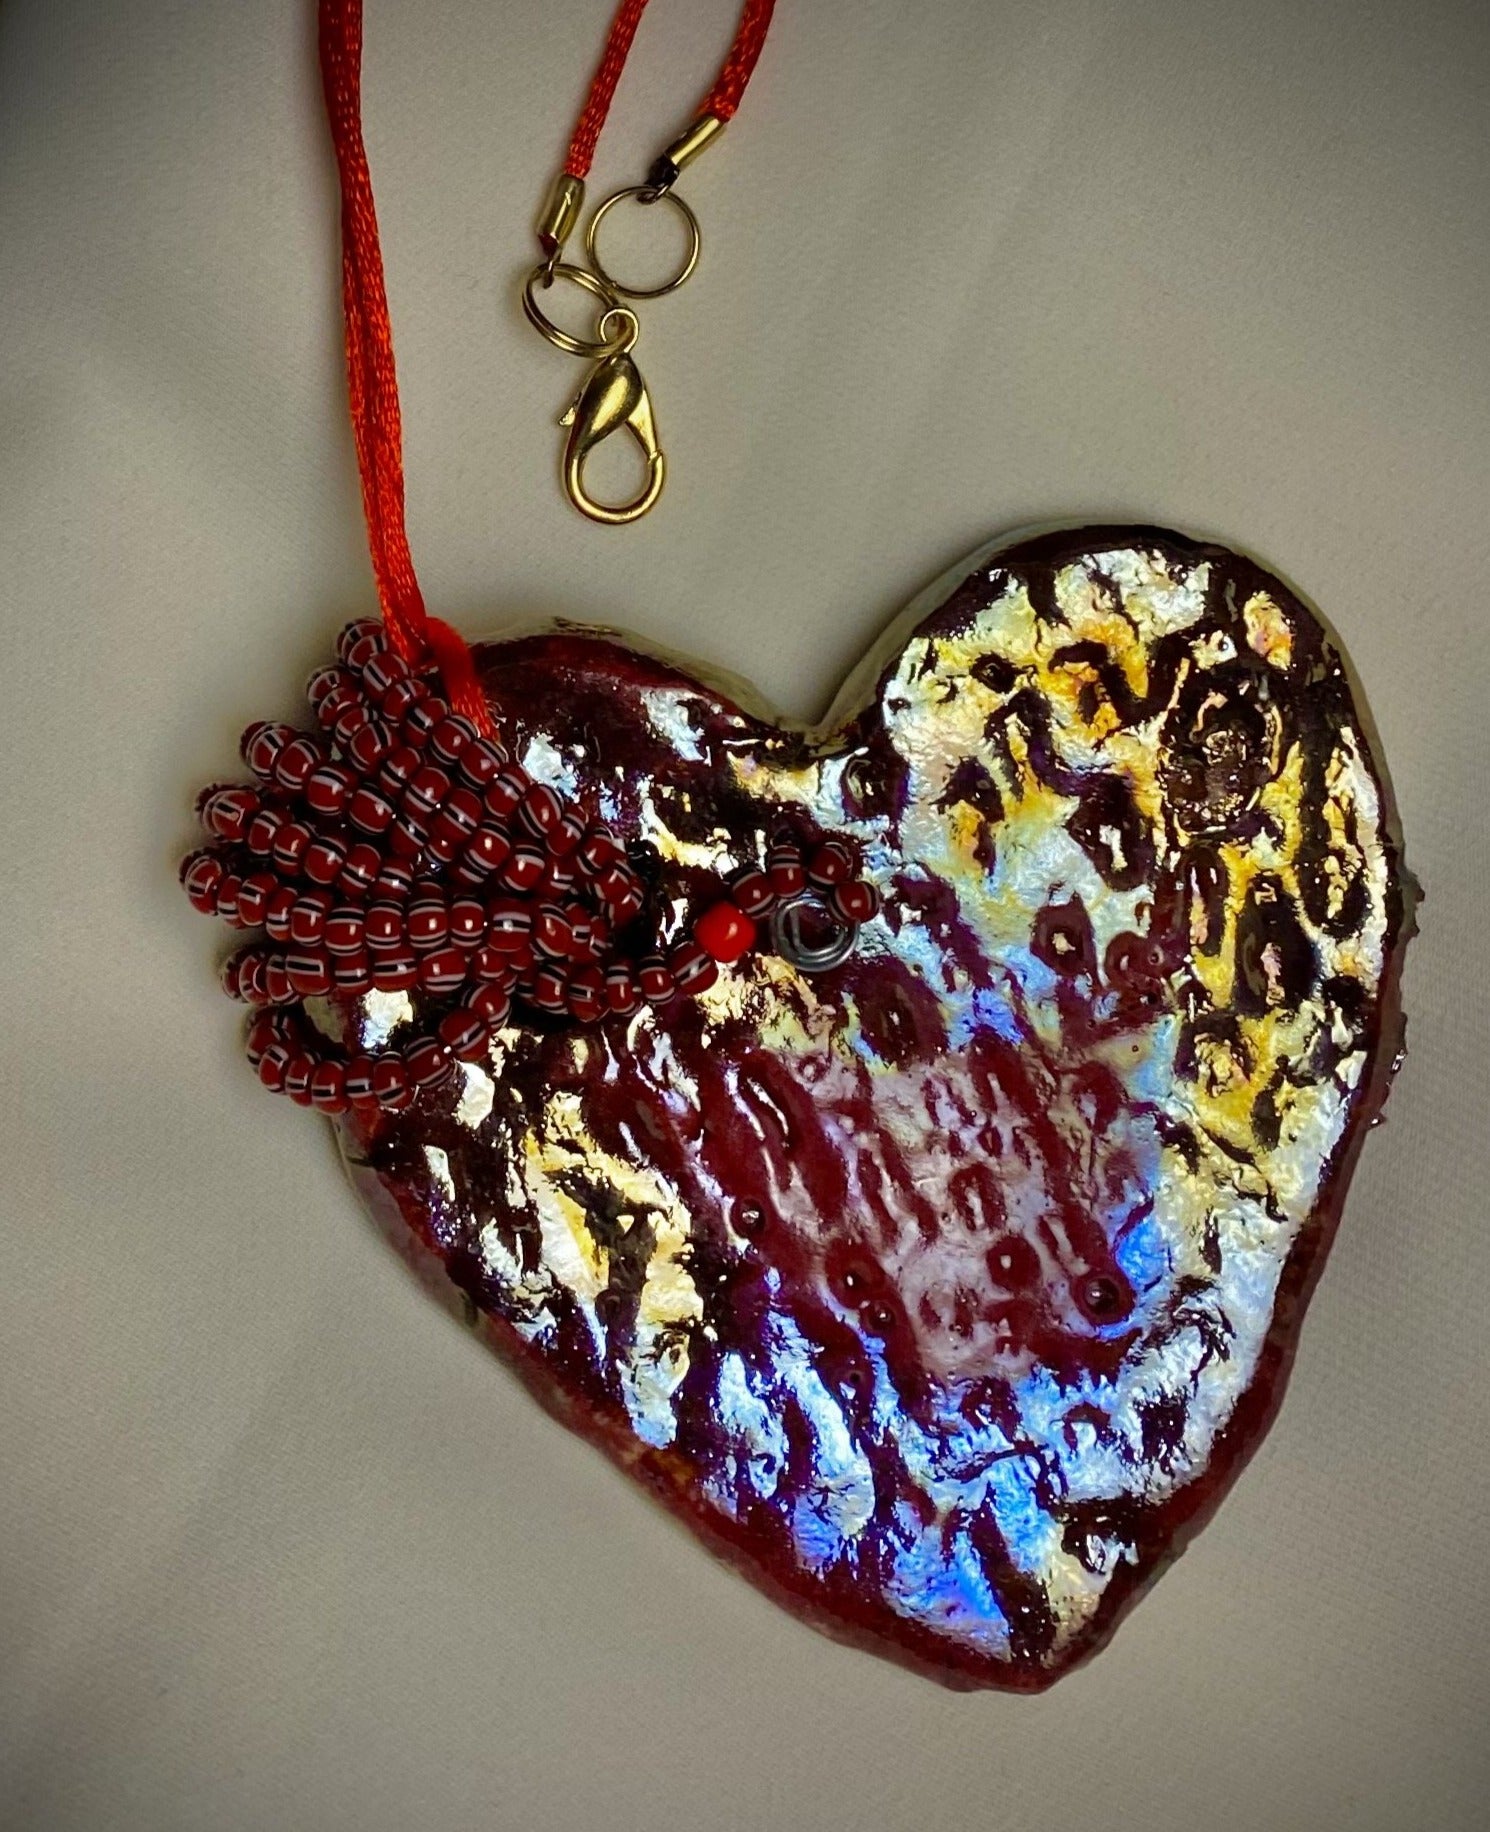 Have A Heart ! Each heart pendant is handmade with love! It is 3"x 3" and weighs approx. 3ozs. This pendant has a red violet and gold metallic raku glazes that renders a unique translucent  patina. The heart has a textured pattern . Both sides are  are different and equally beautiful! It holds a spiral of red violet mini beads on a spiral copper wire. This pendant has a nice 12" red suede cord!